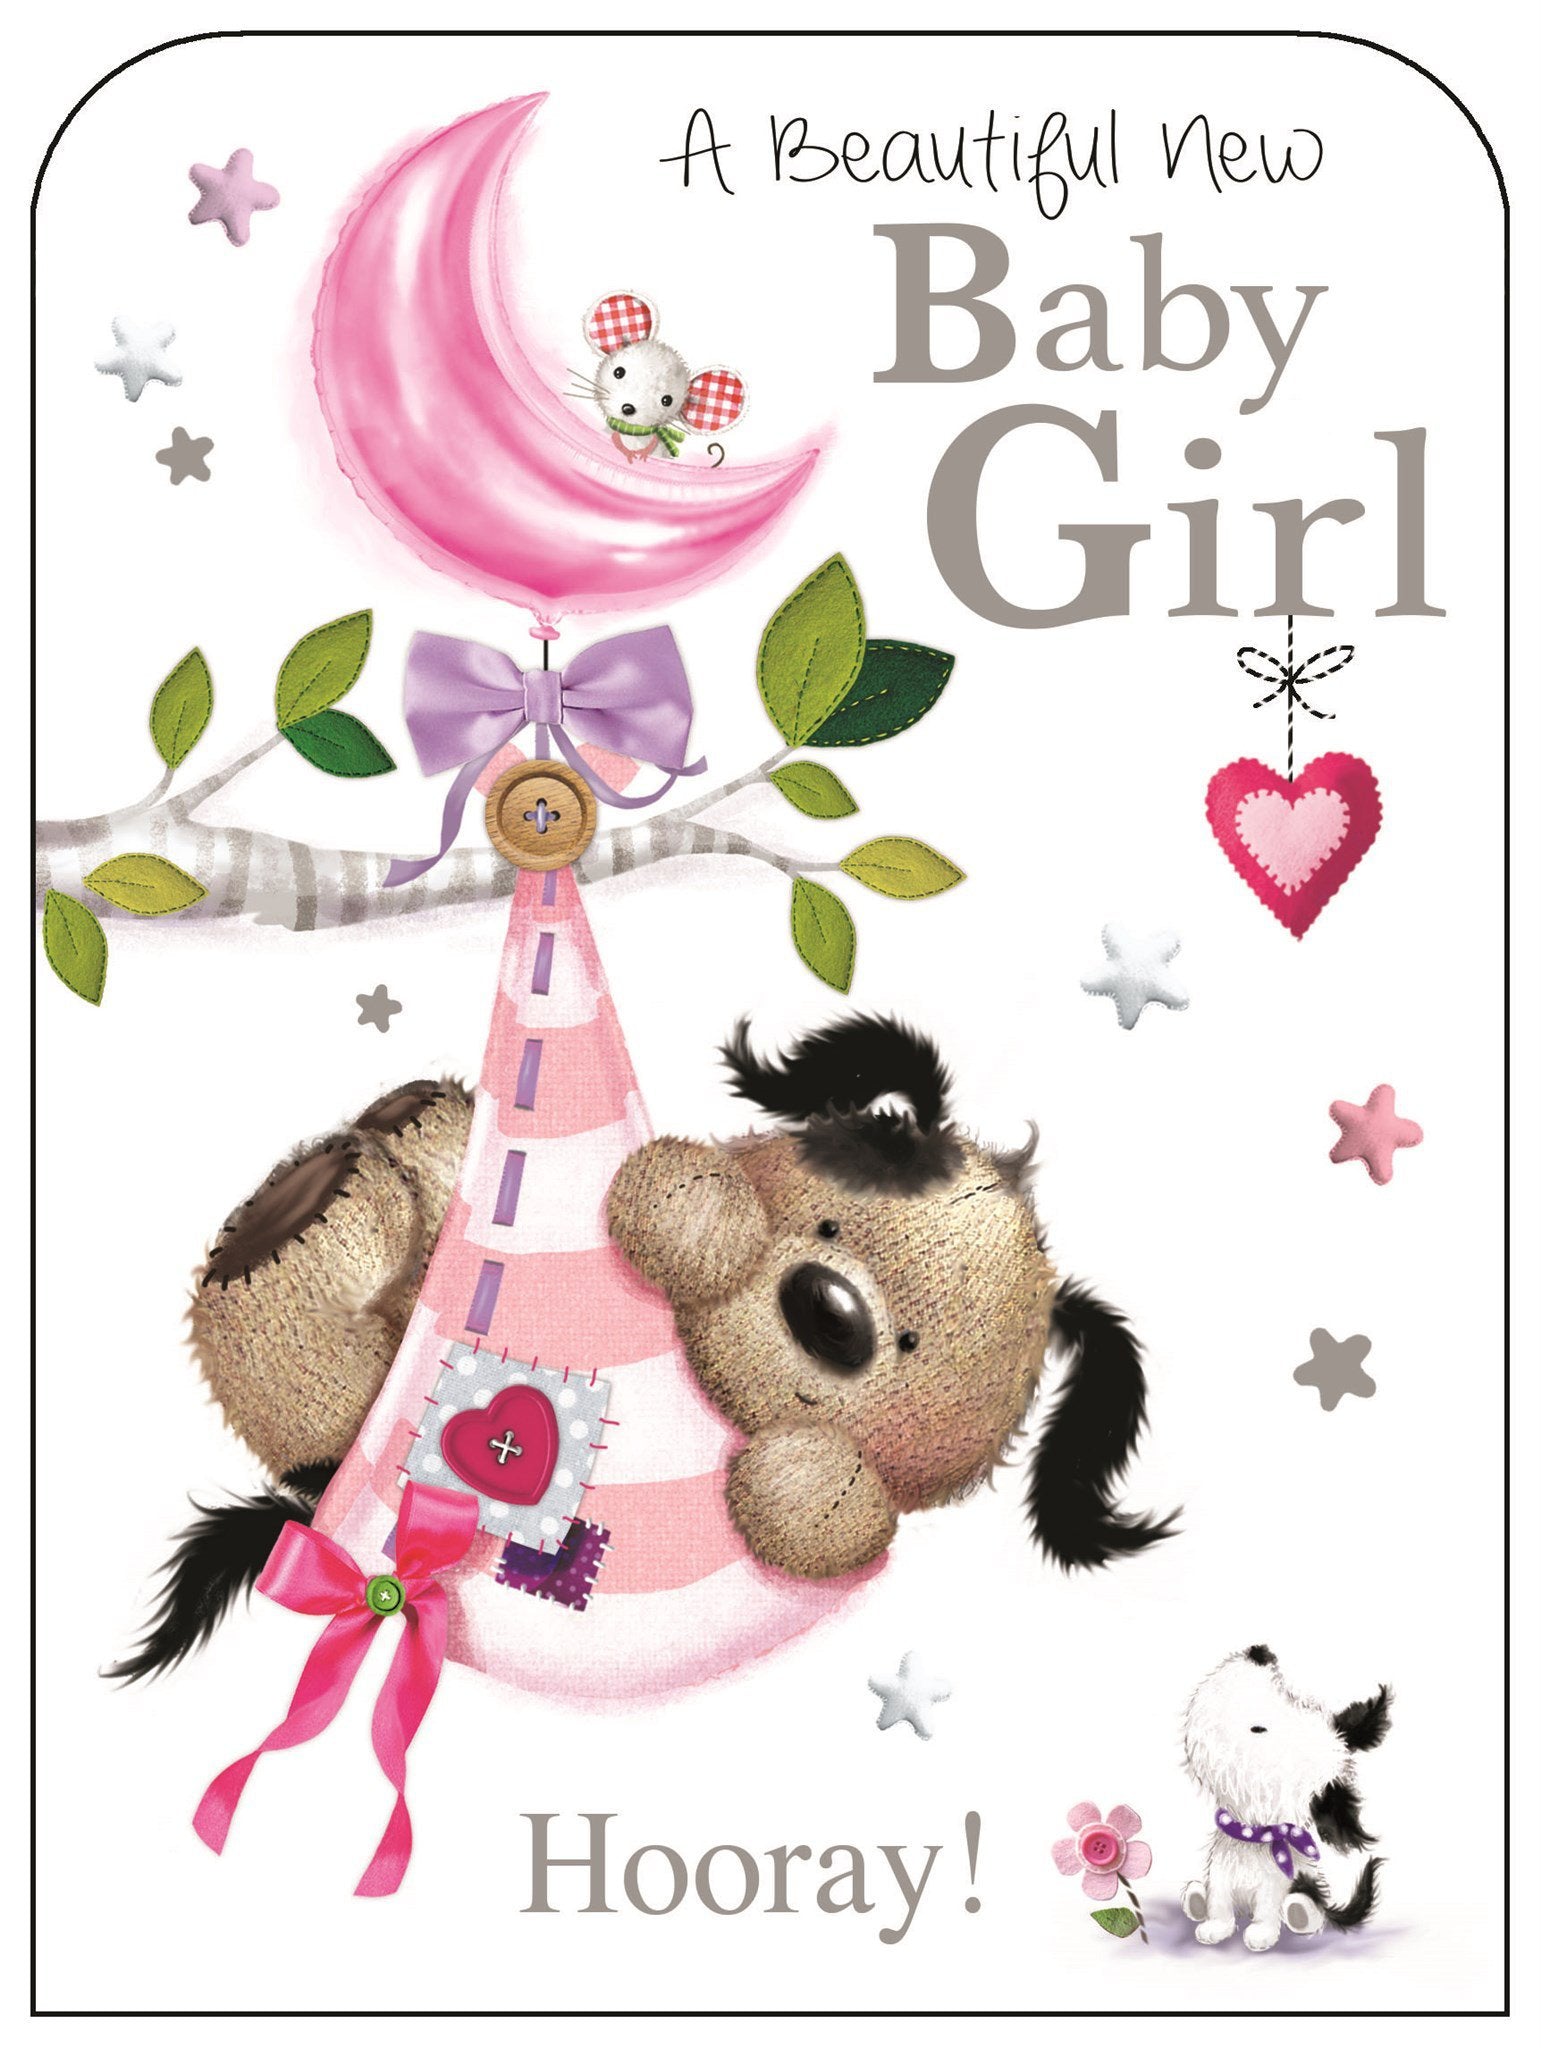 Front of New Baby Girl Cute Greetings Card